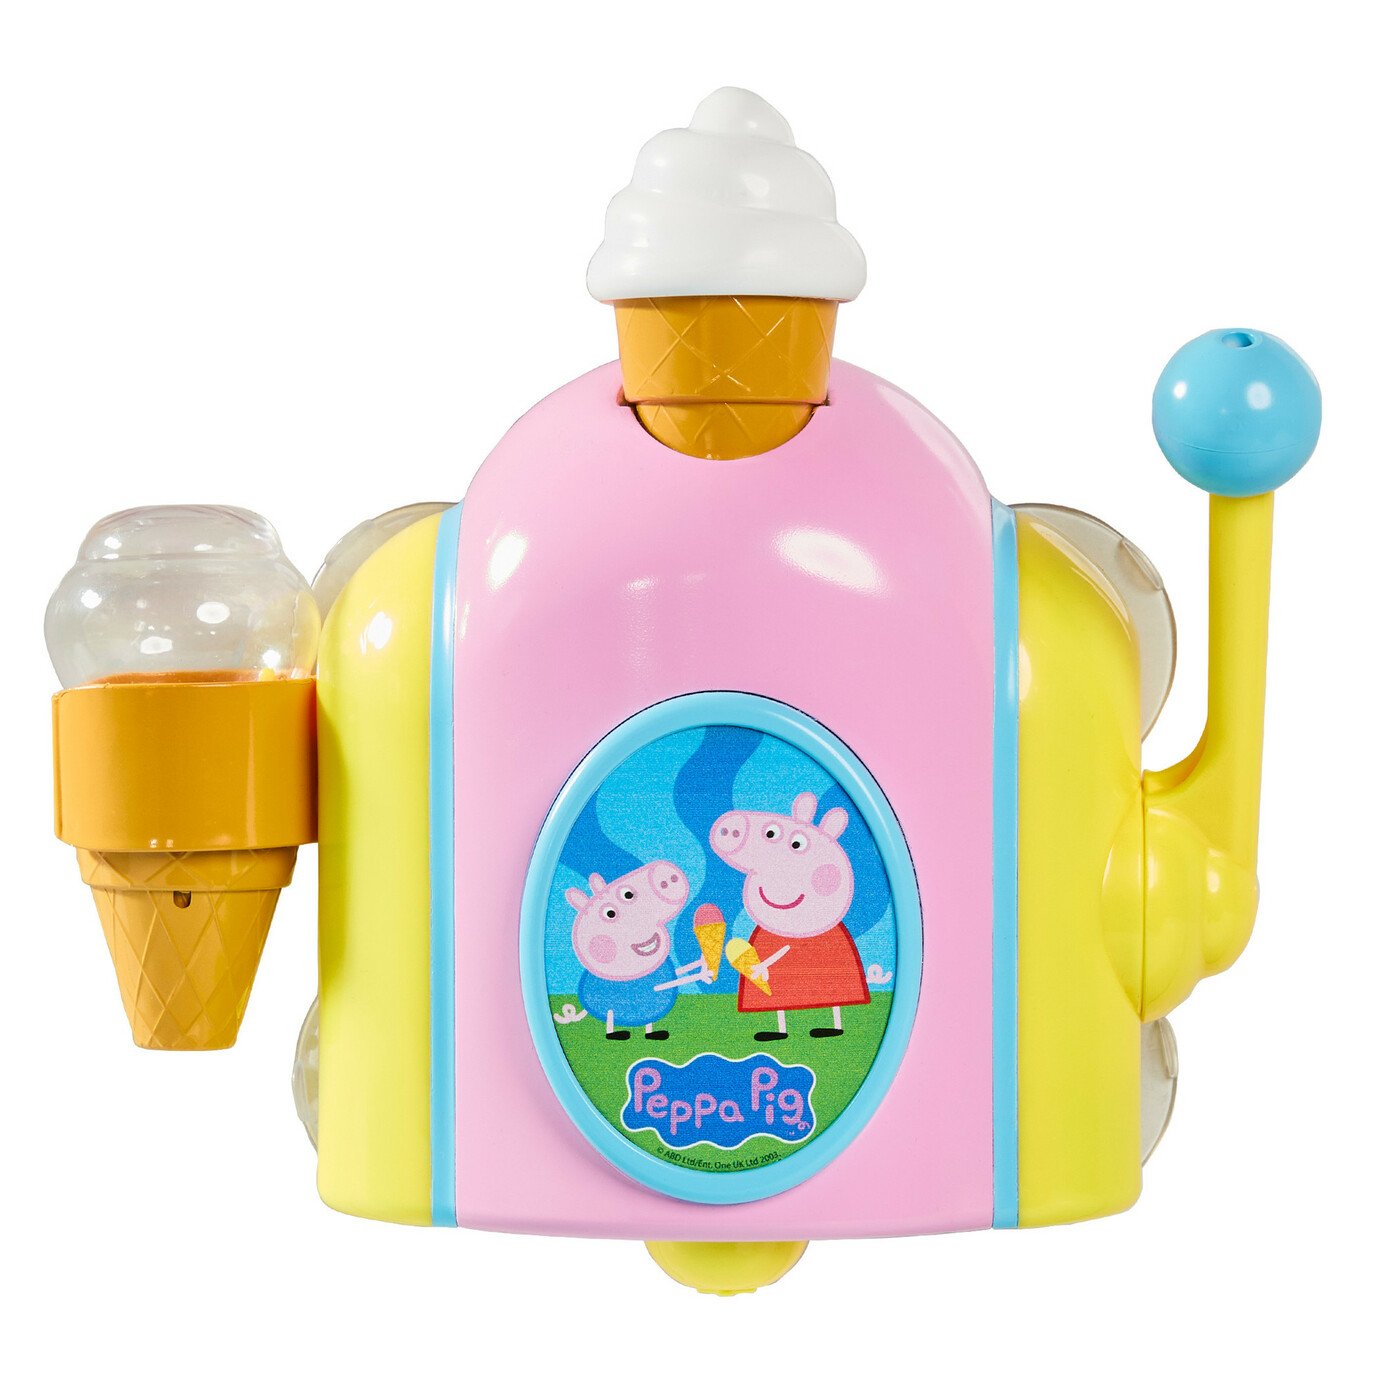 Peppa Pig Bubble Ice Cream Maker Review